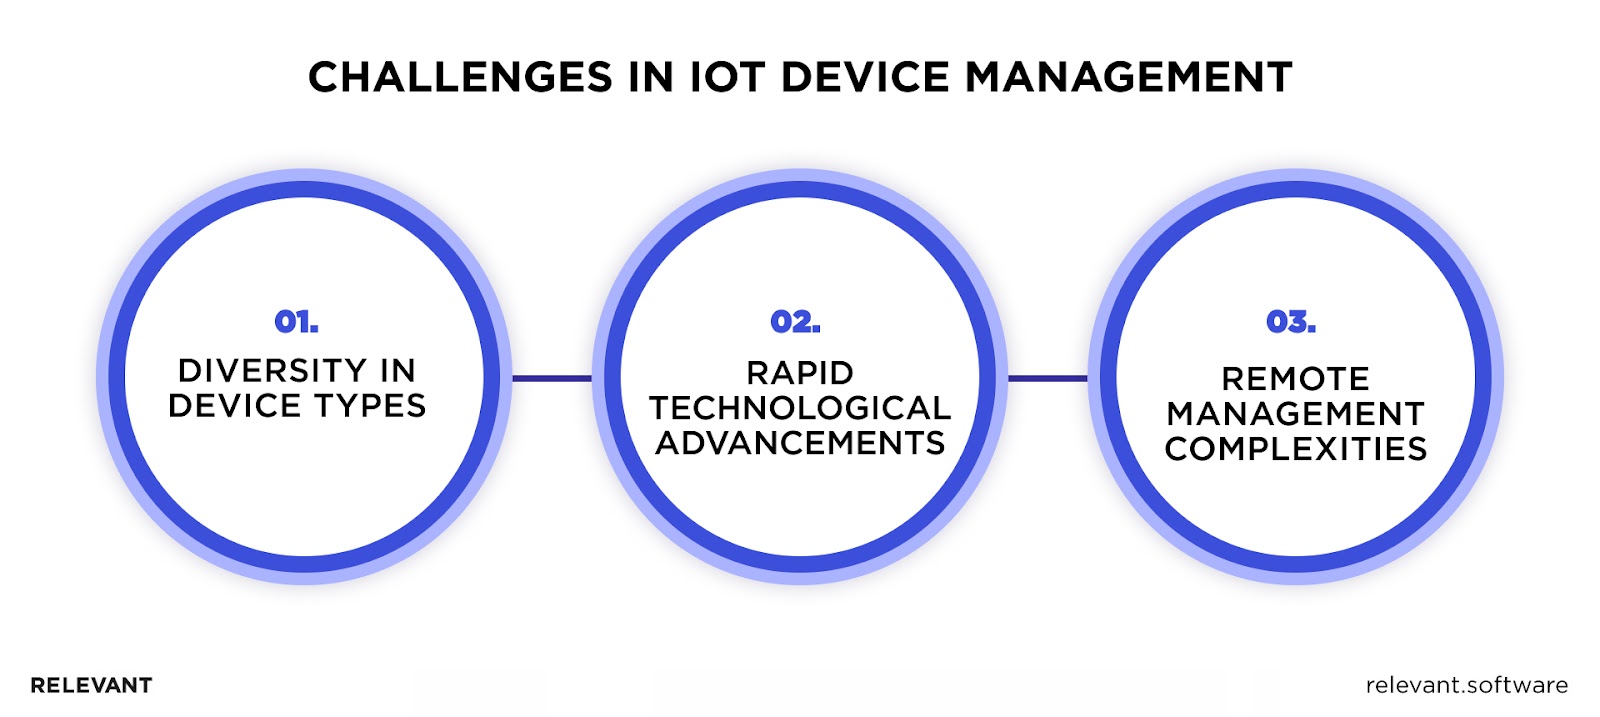 Challenges in IoT Device Management